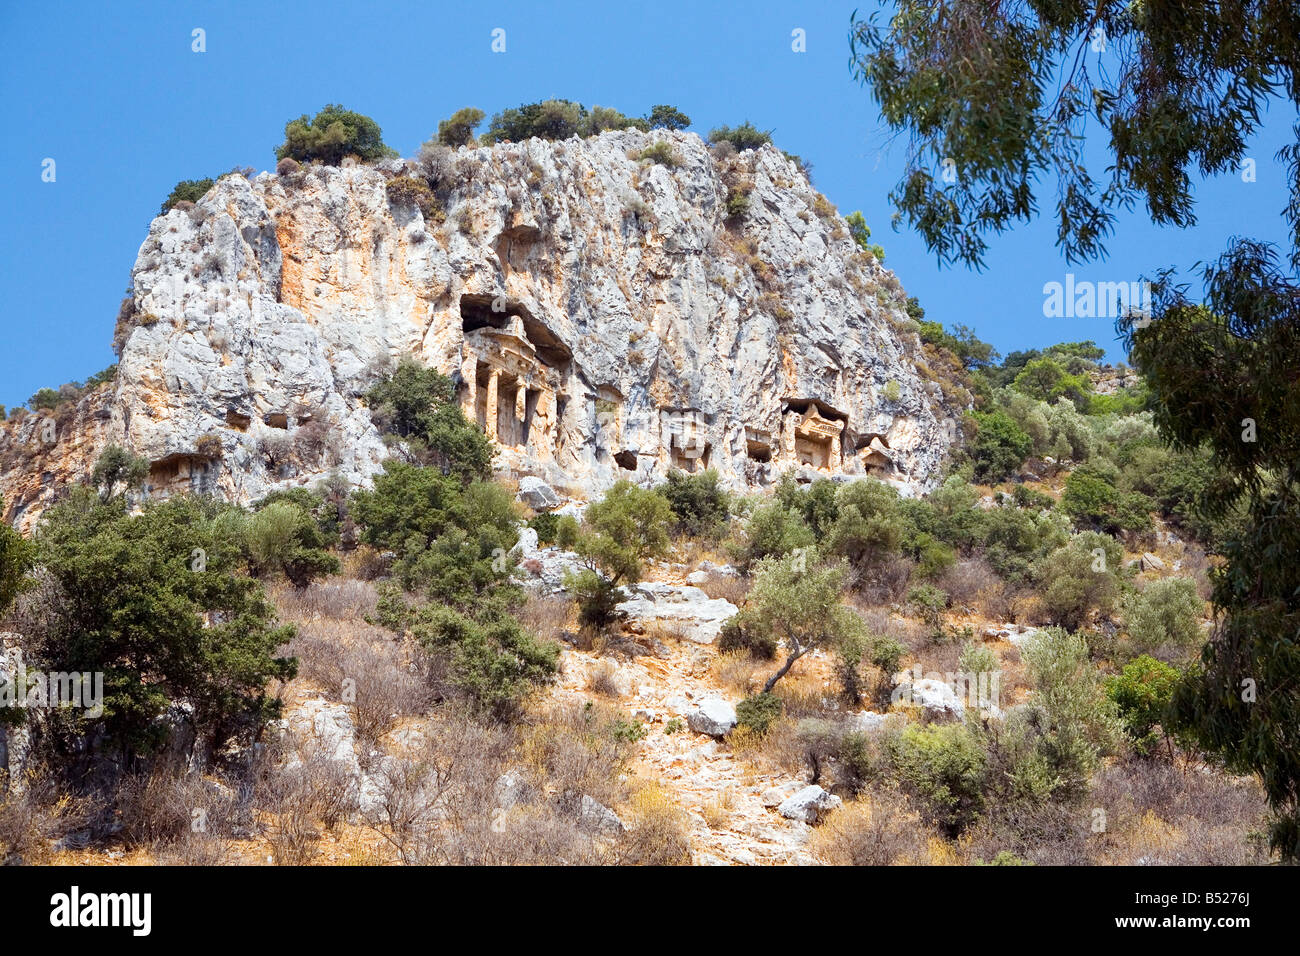 Lycian Rock Tombs for the Kings of Caunos in Dalyan Turkey Stock Photo